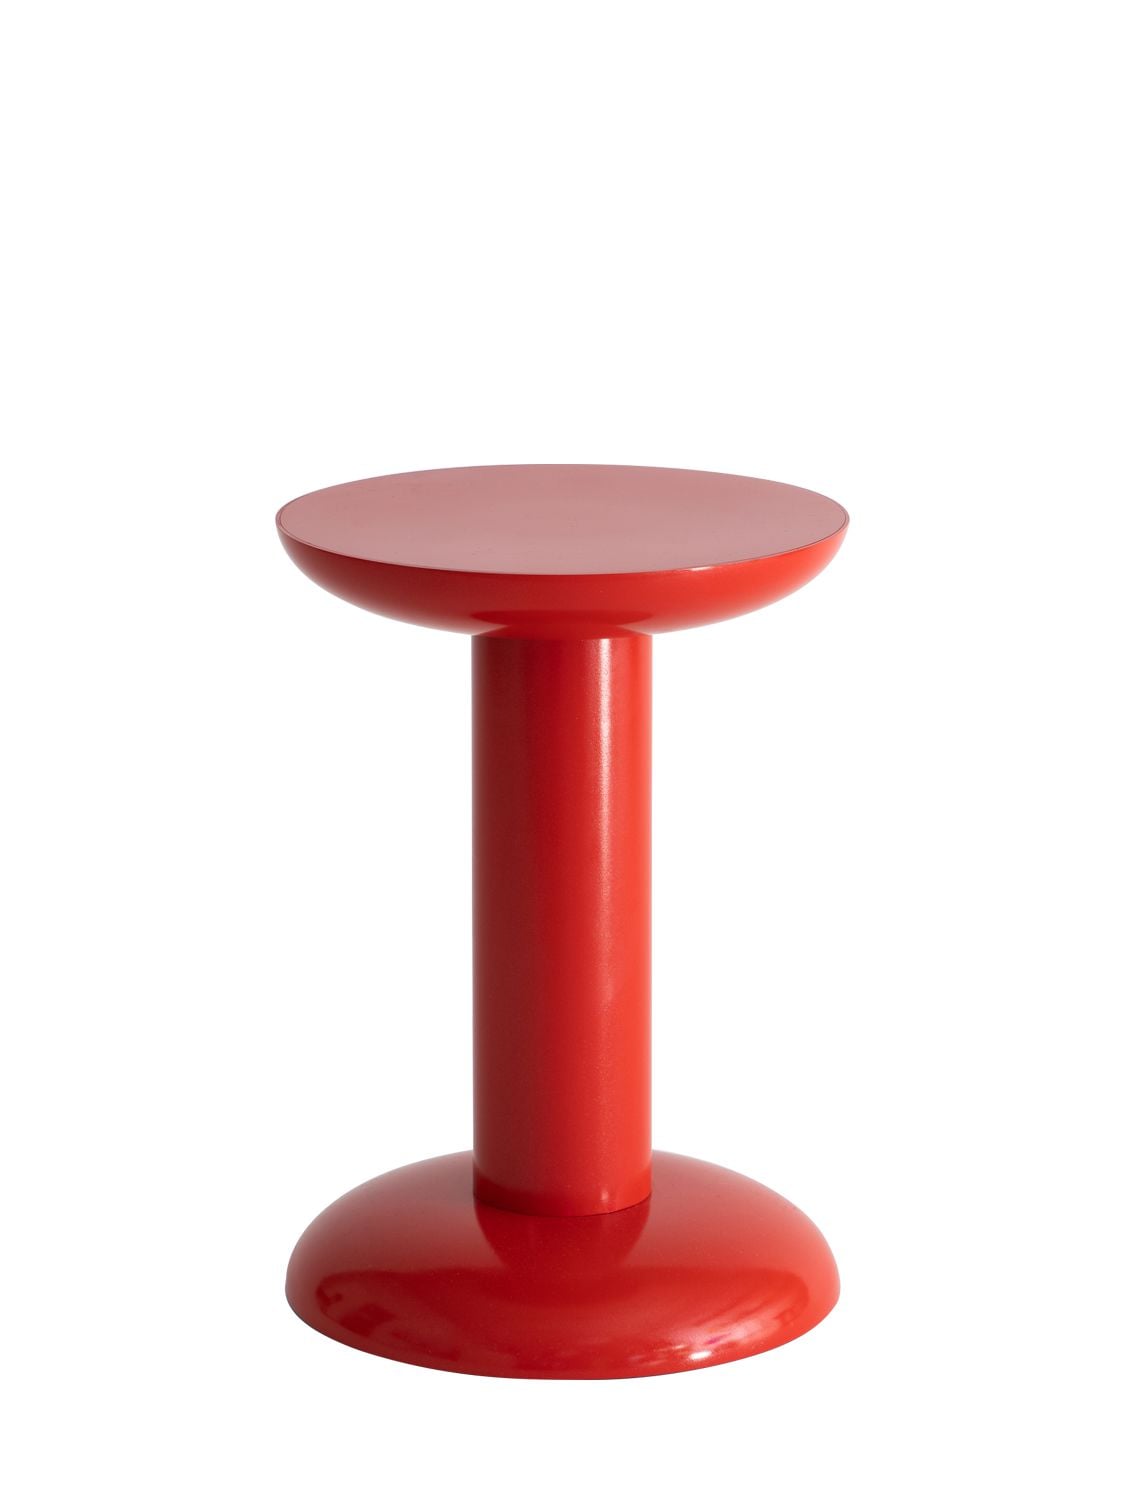 Raawii + George Sowden Thing Aluminum Table In Carmine Red